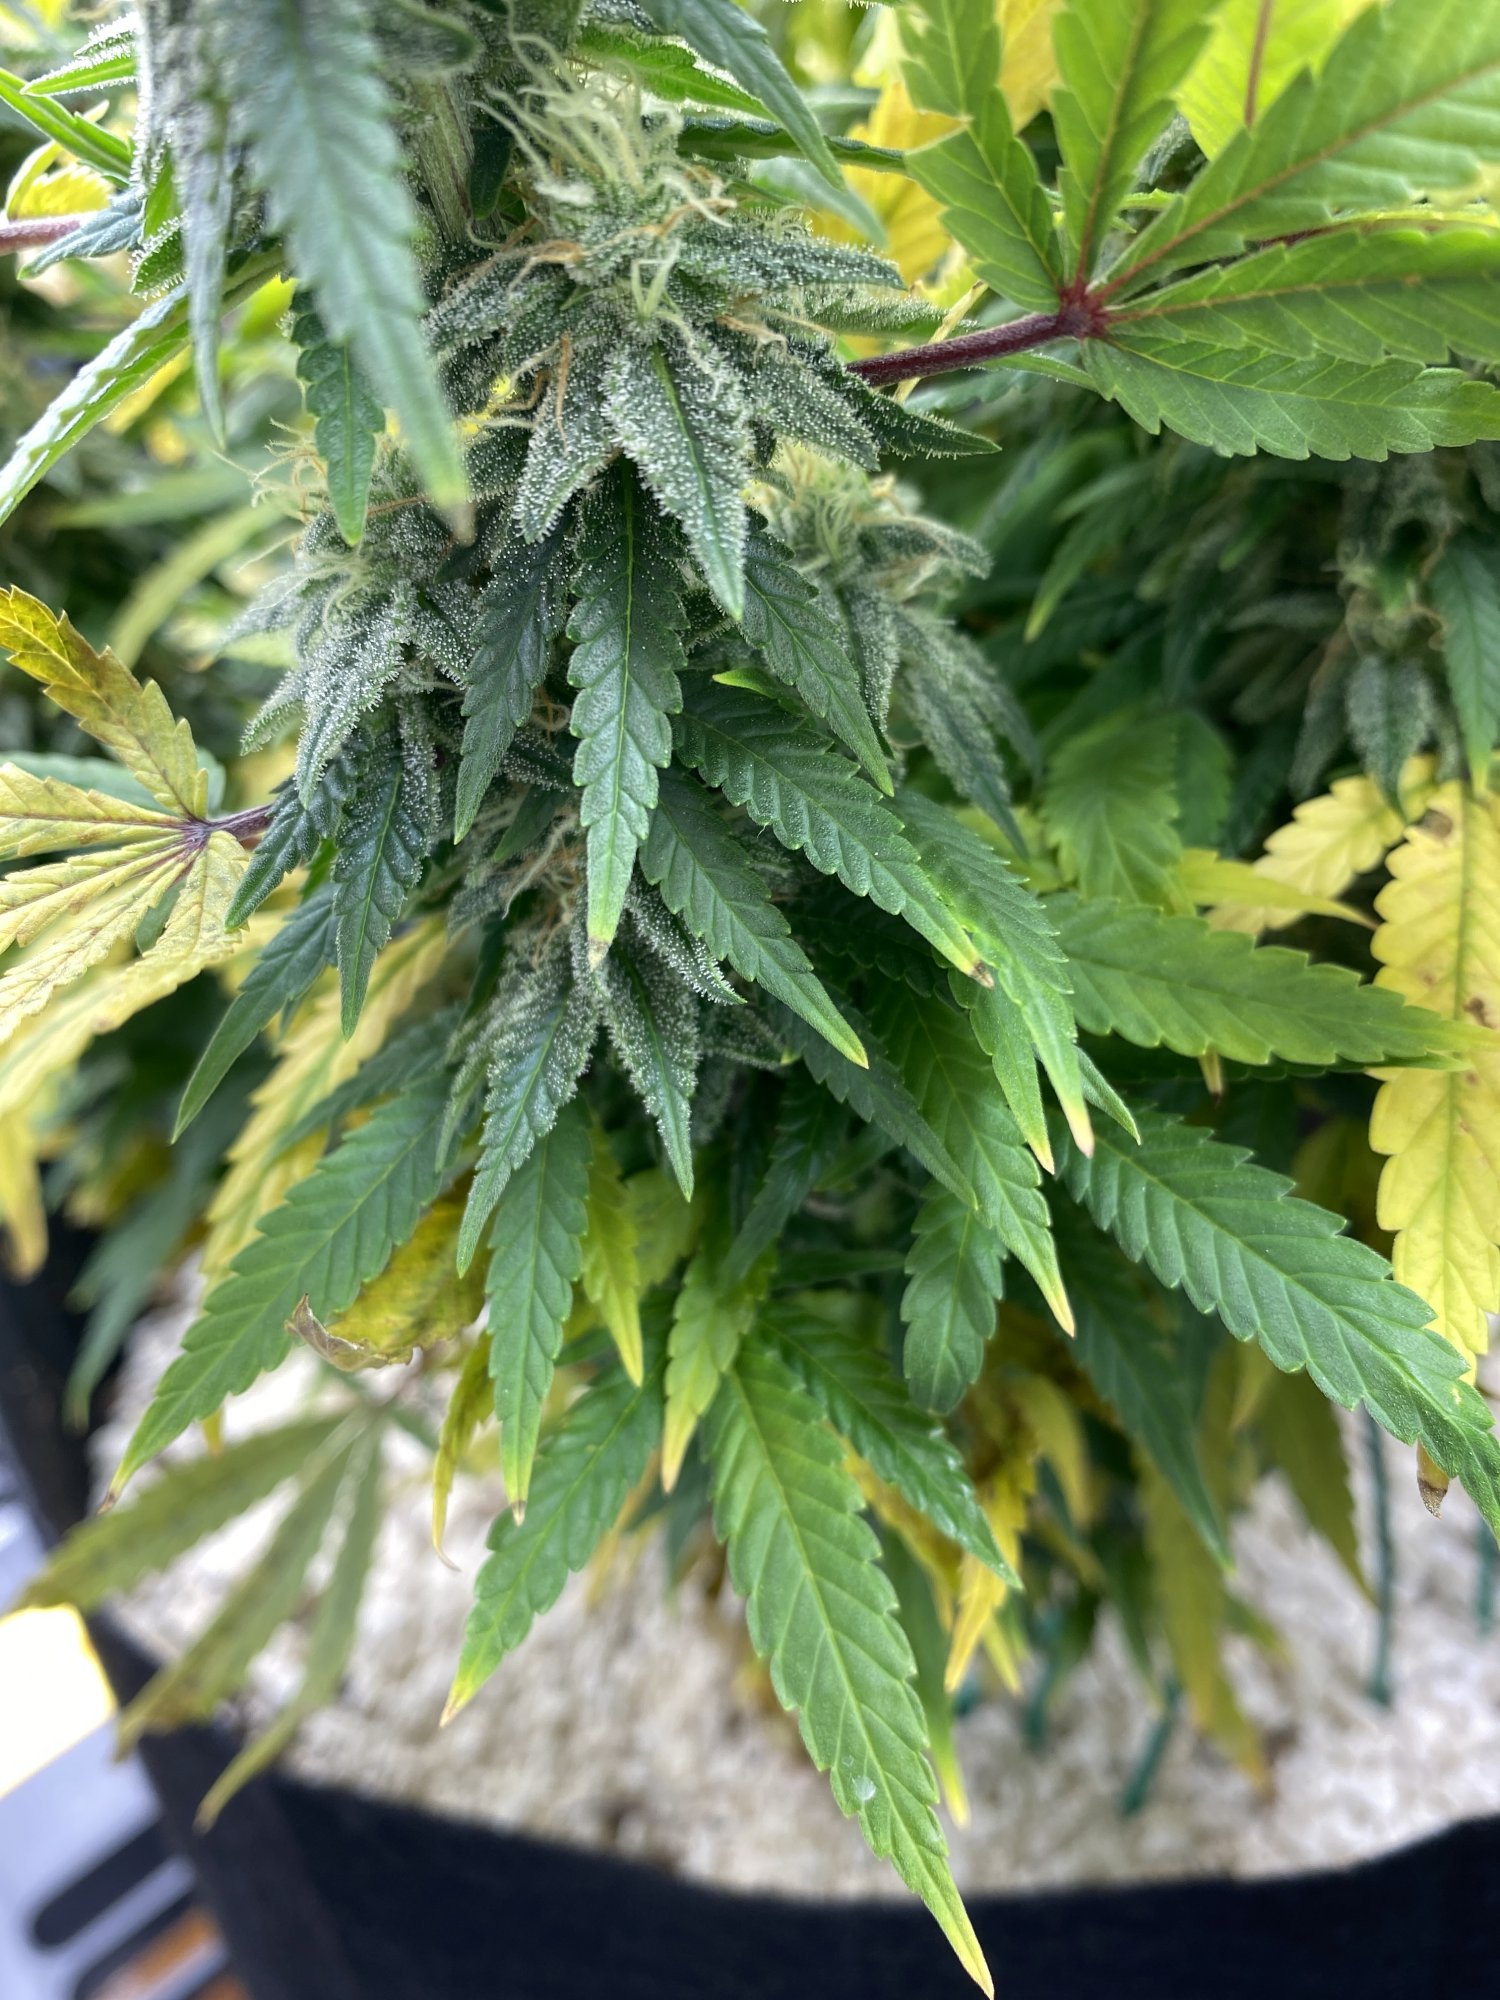 My recurring issue during flowering wtf 2